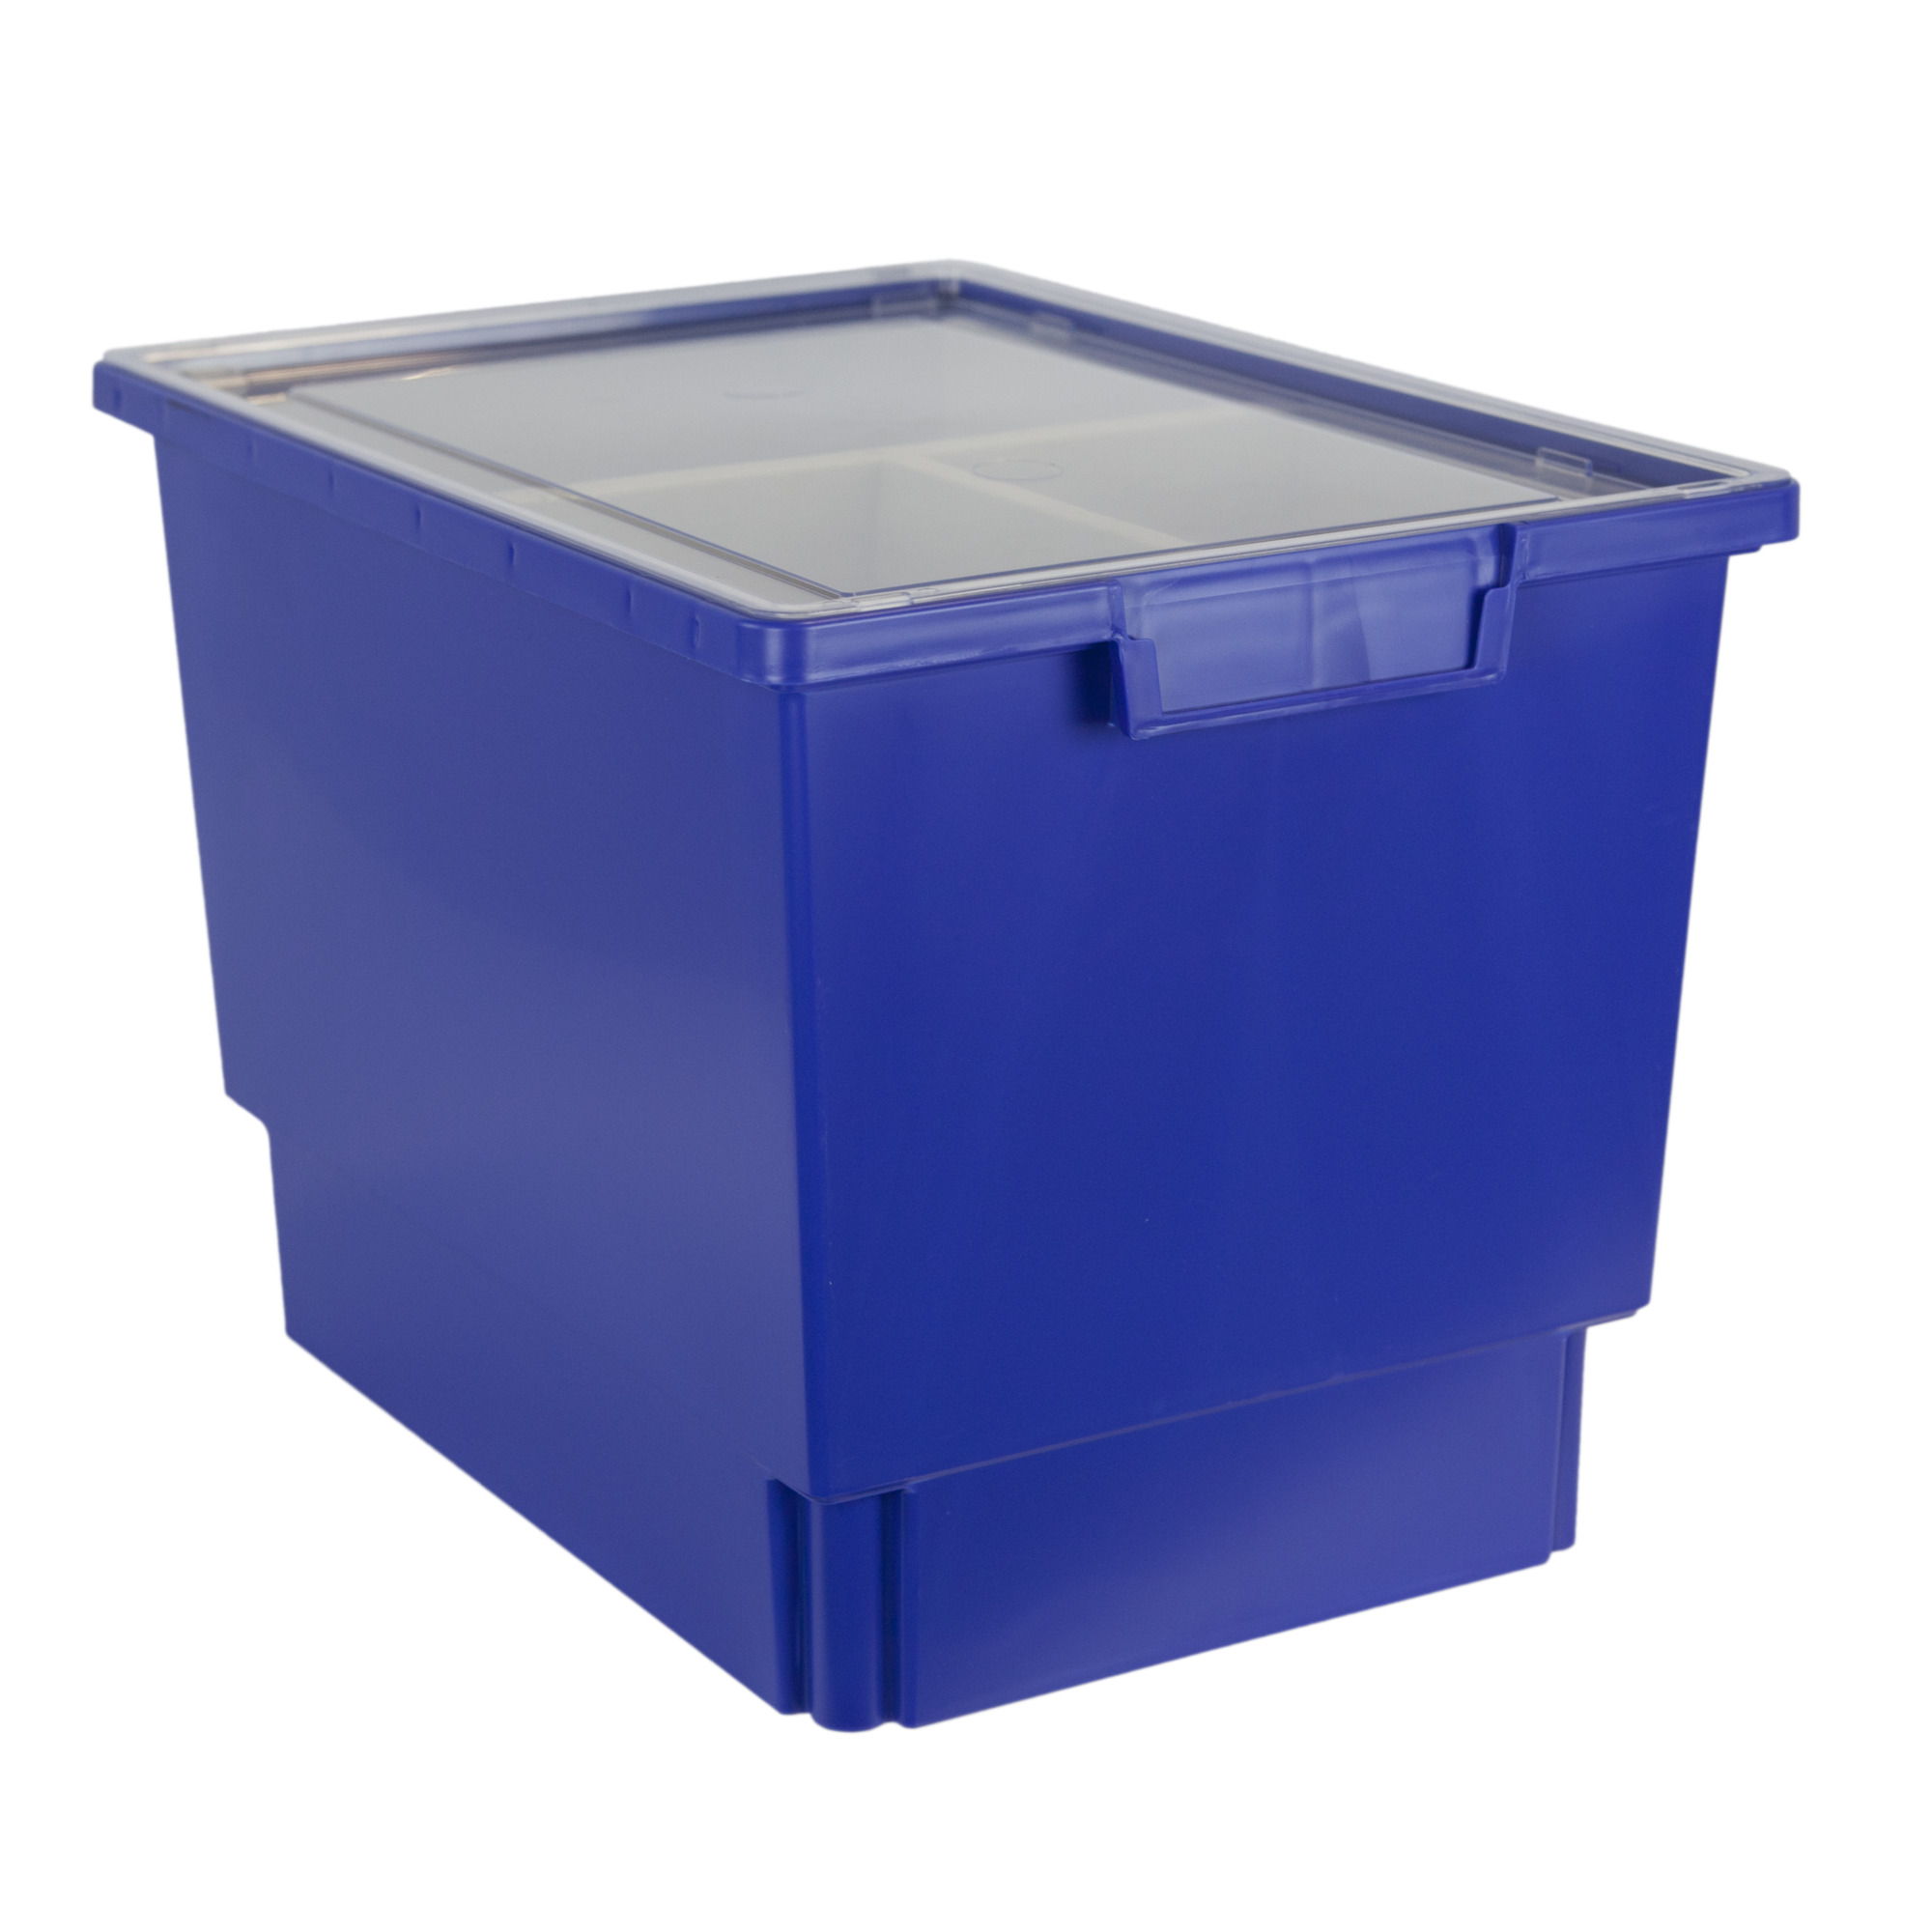 Certwood StorWerks, Slim Line 12Inch Tray Kit (3 x Divisions) Blue-3PK, Included (qty.) 3, Material Plastic, Height 12 in, Model CE1954PB-NK0004-3